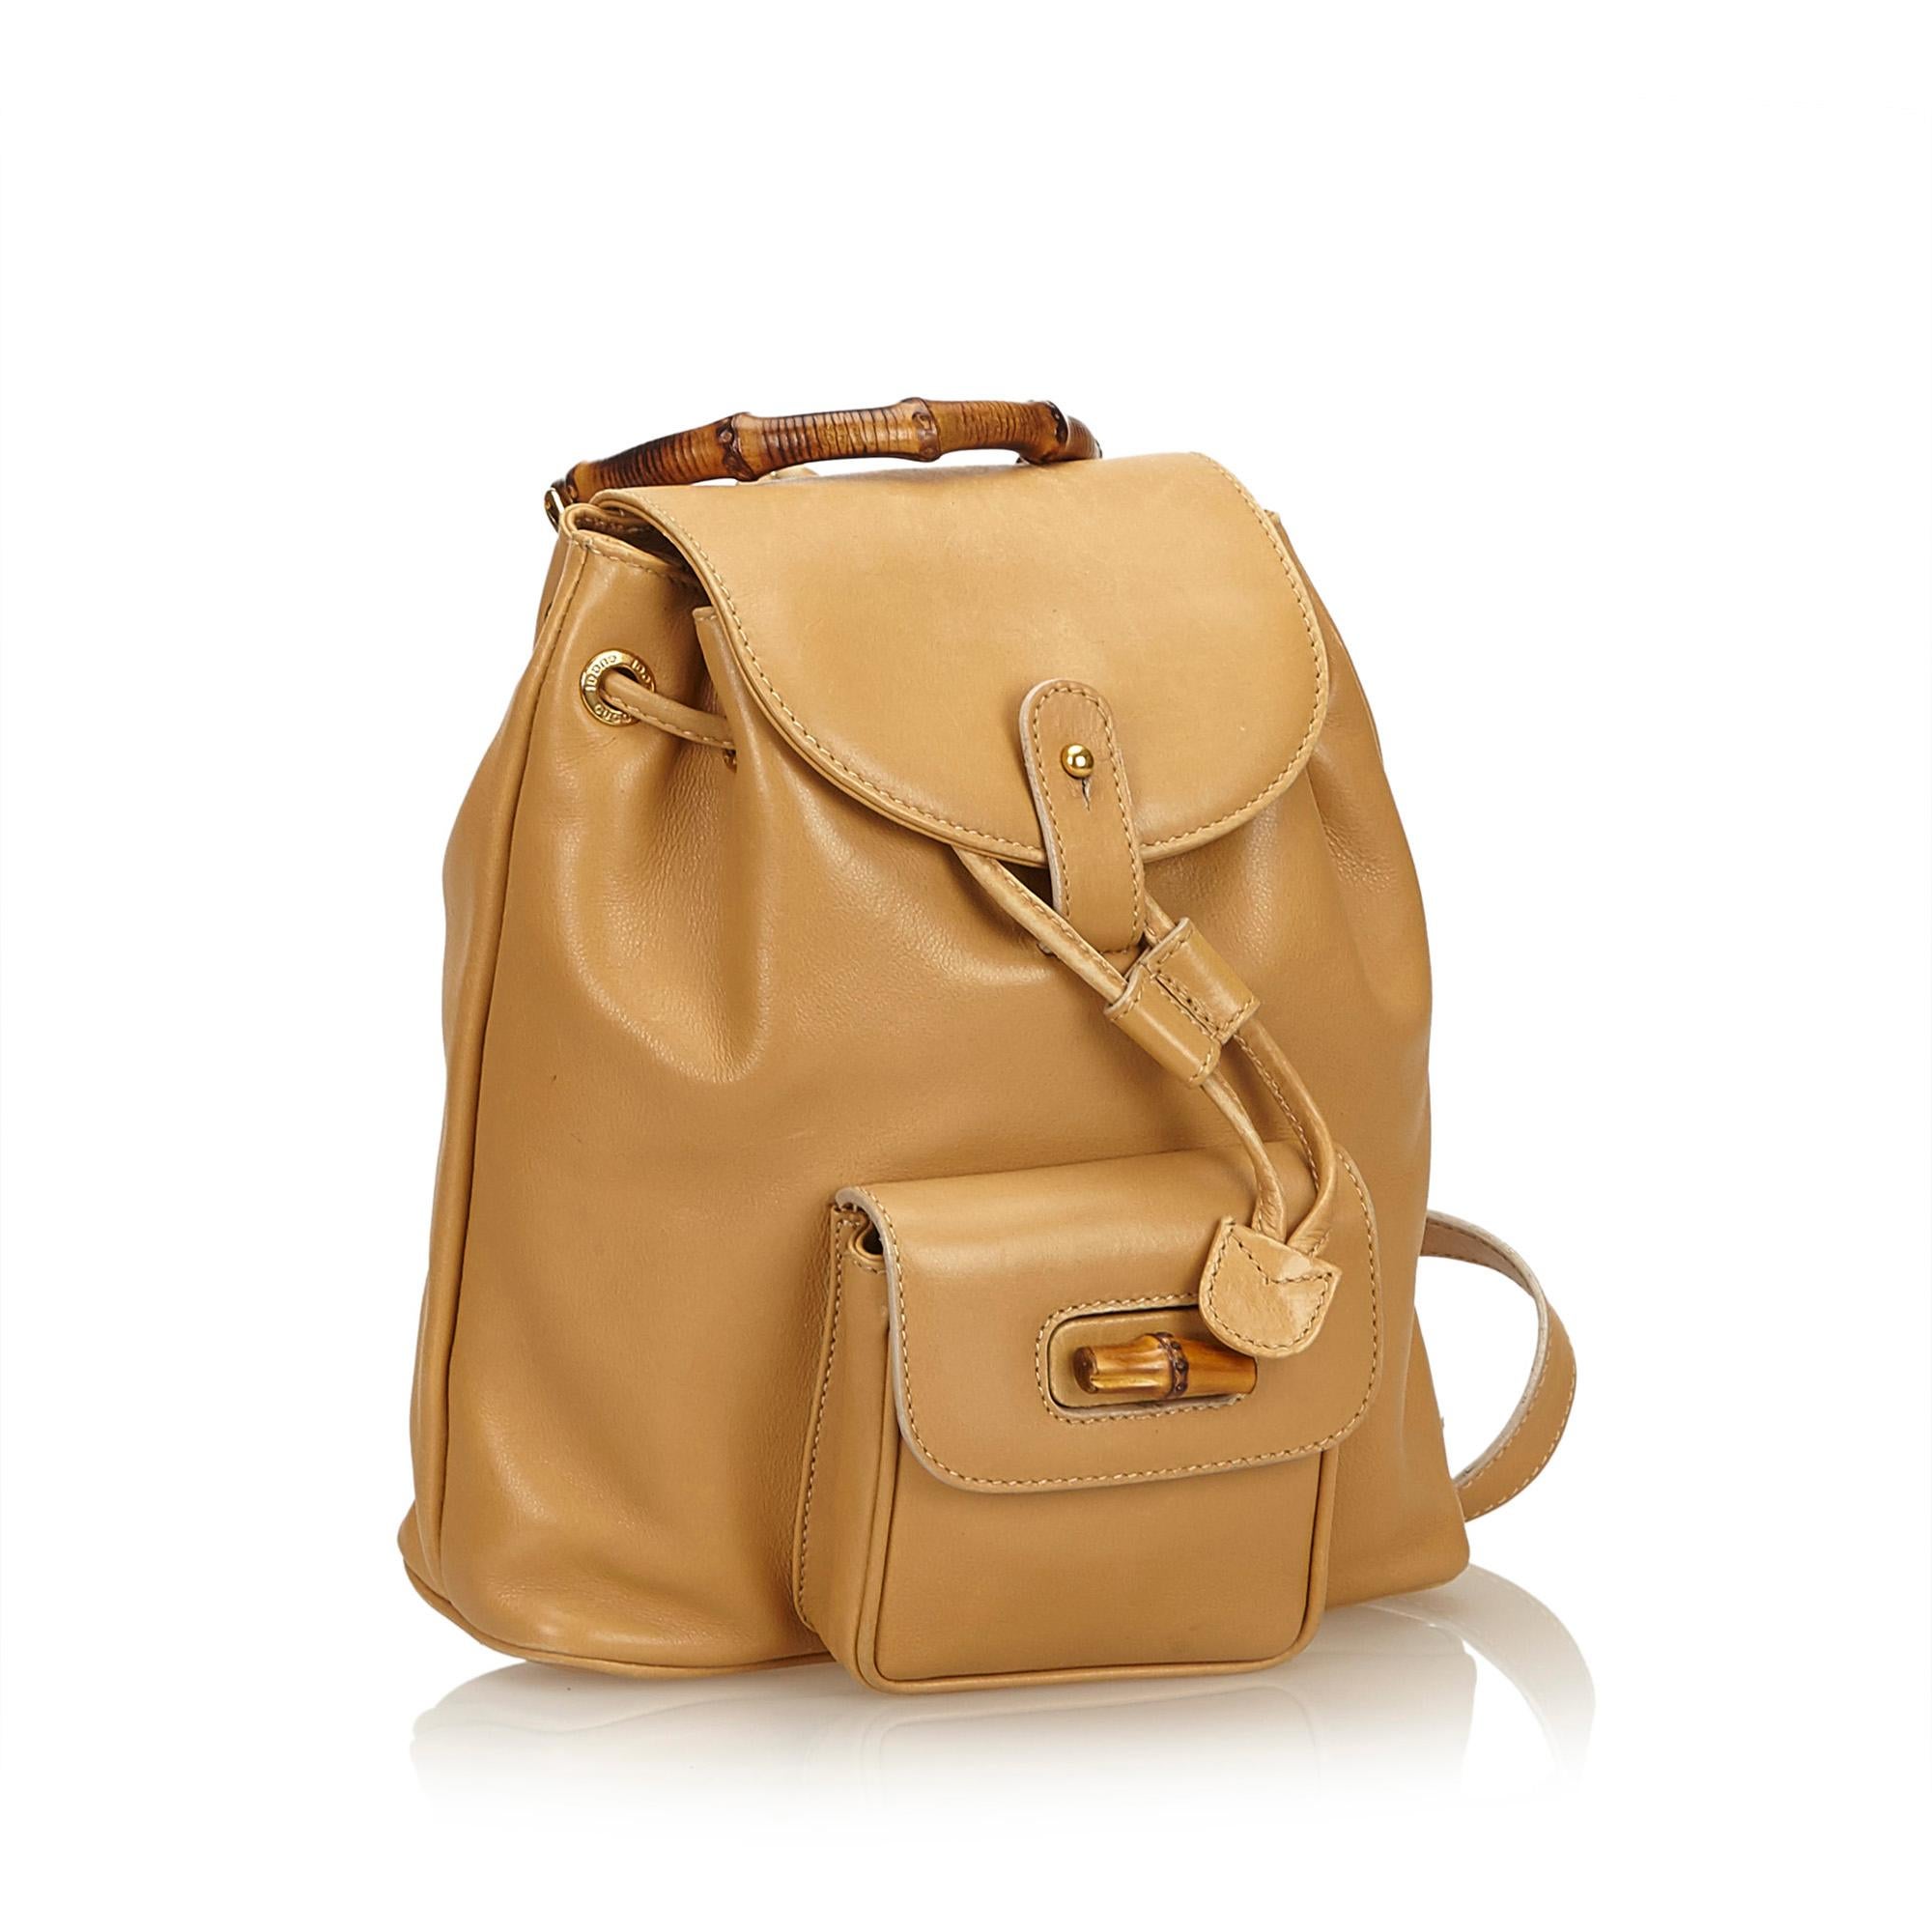 This backpack features a leather body, flat back straps, bamboo top handle, top flap, drawstring closure, exterior flap pocket with bamboo twist lock closure, and interior zip pocket.

It carries a B condition rating.

Dimensions: 
Length 25